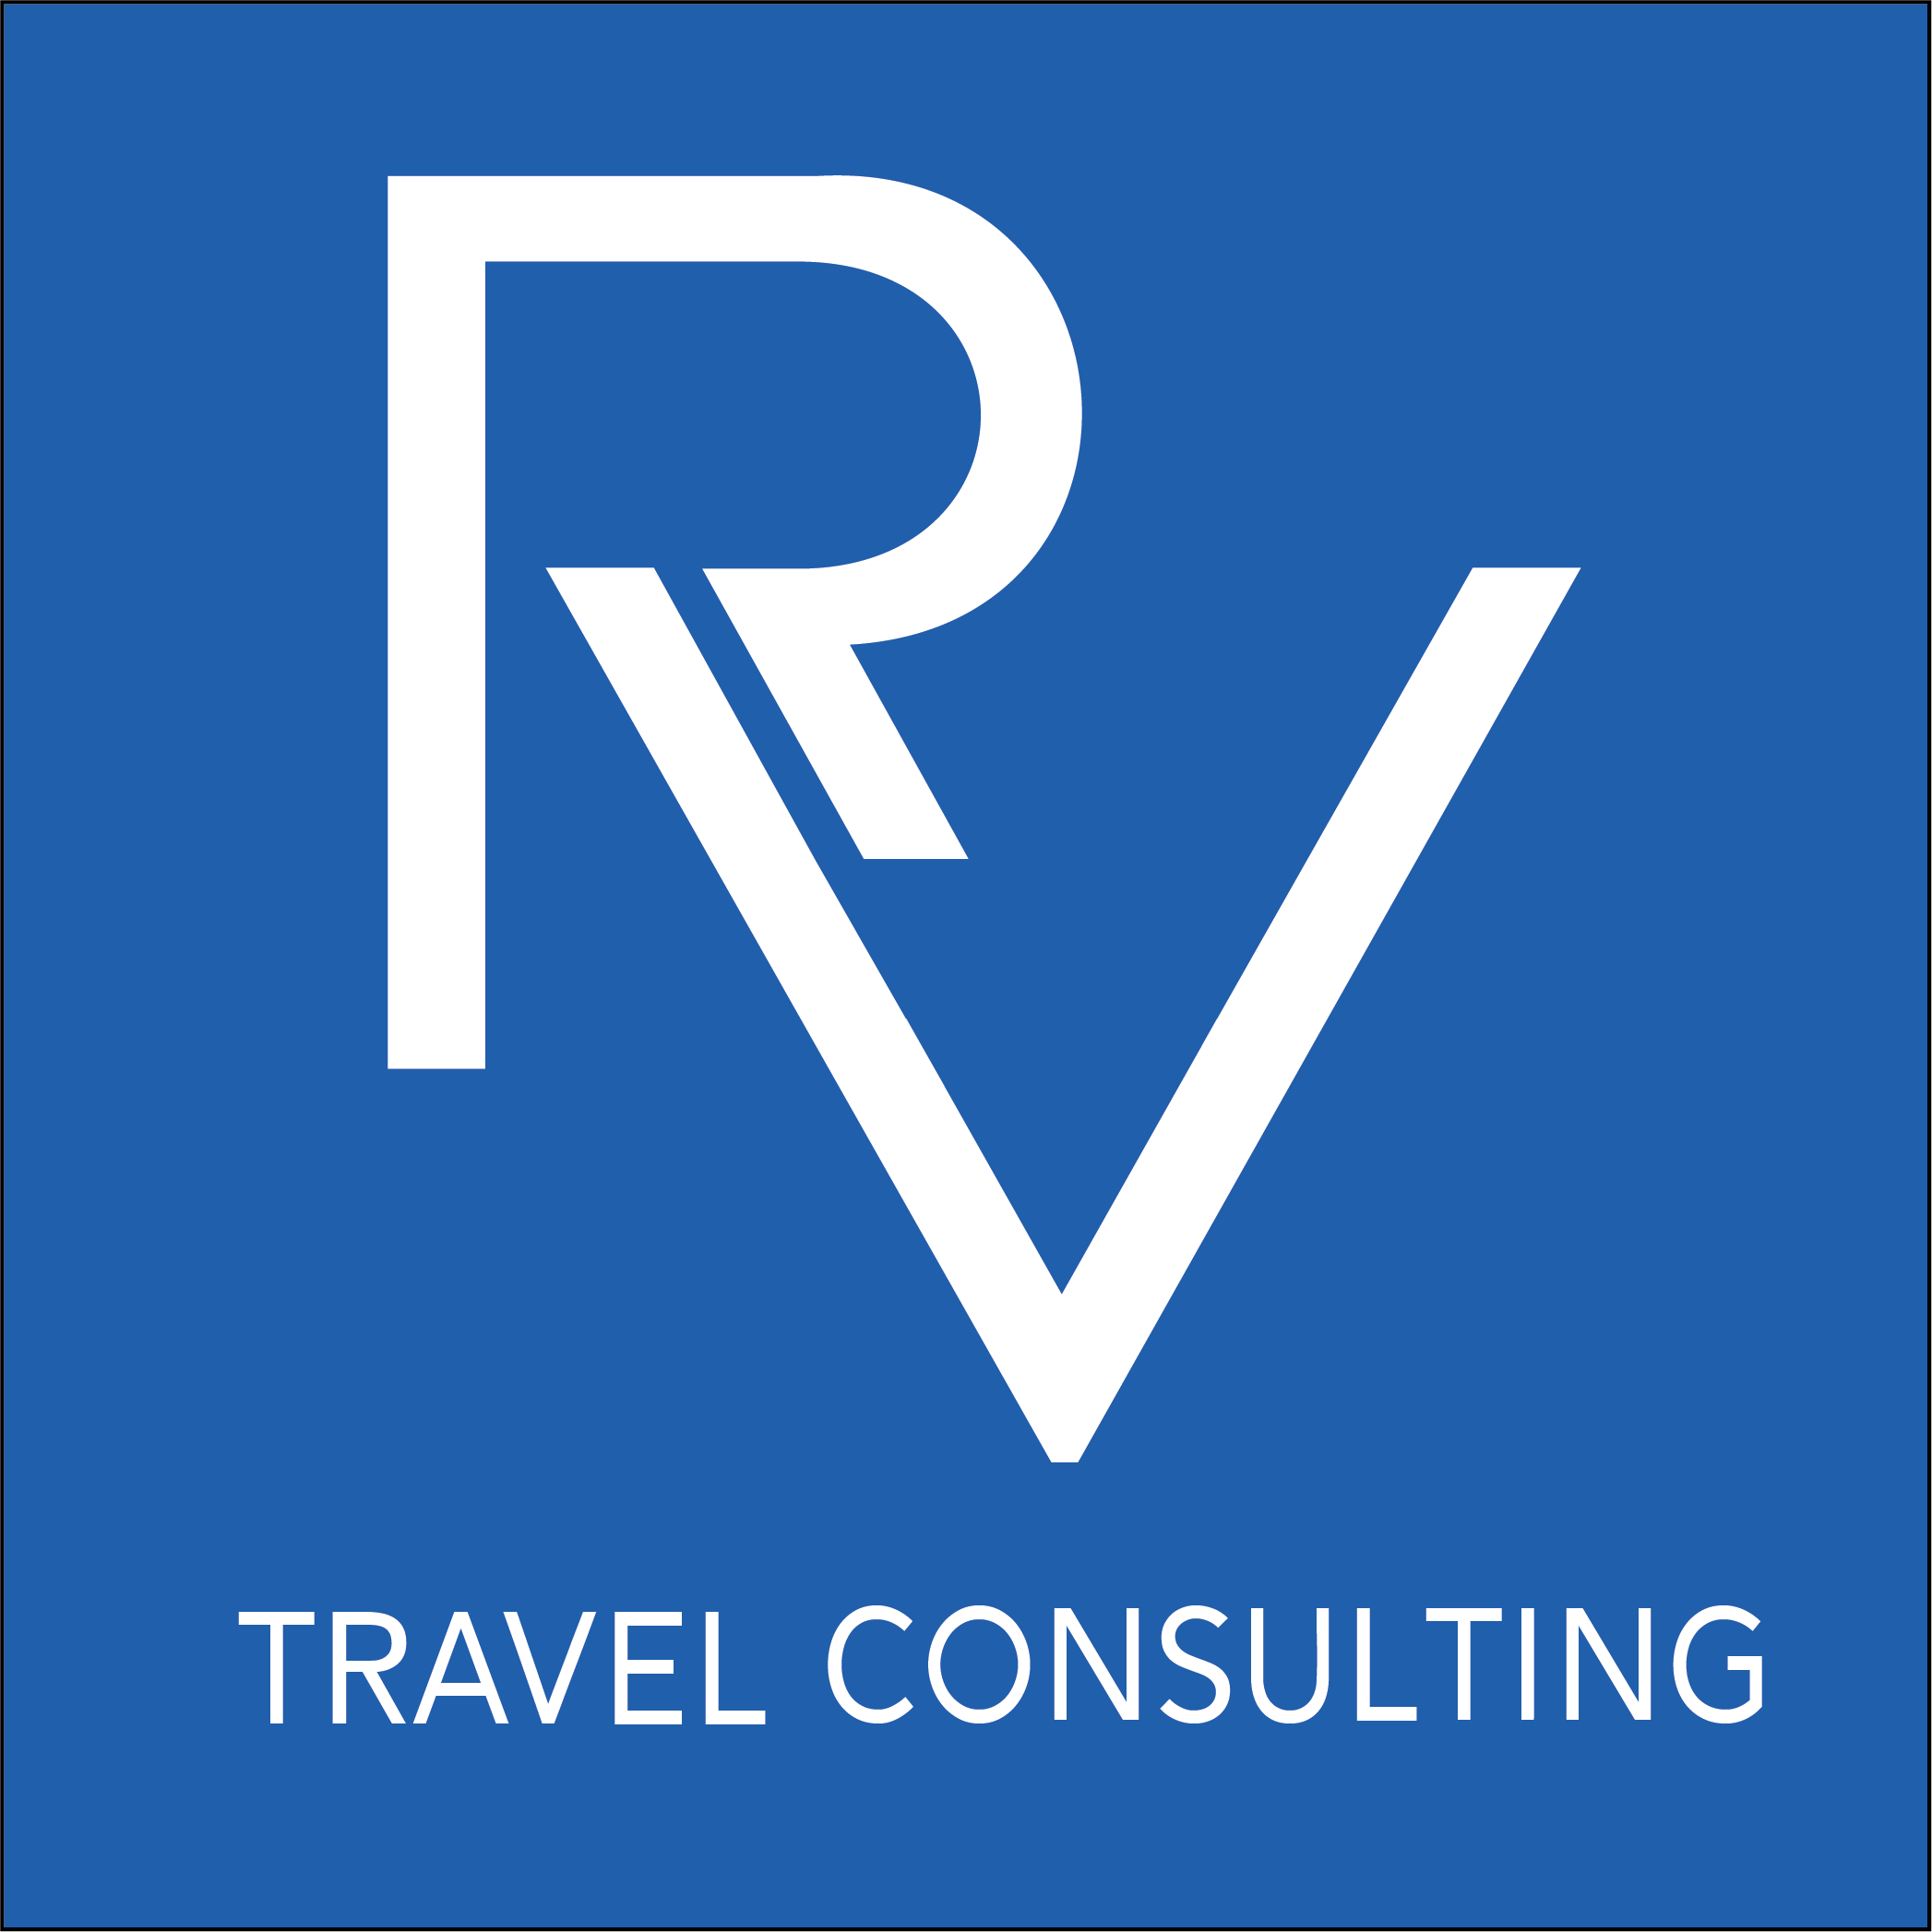 RV Travel Consulting